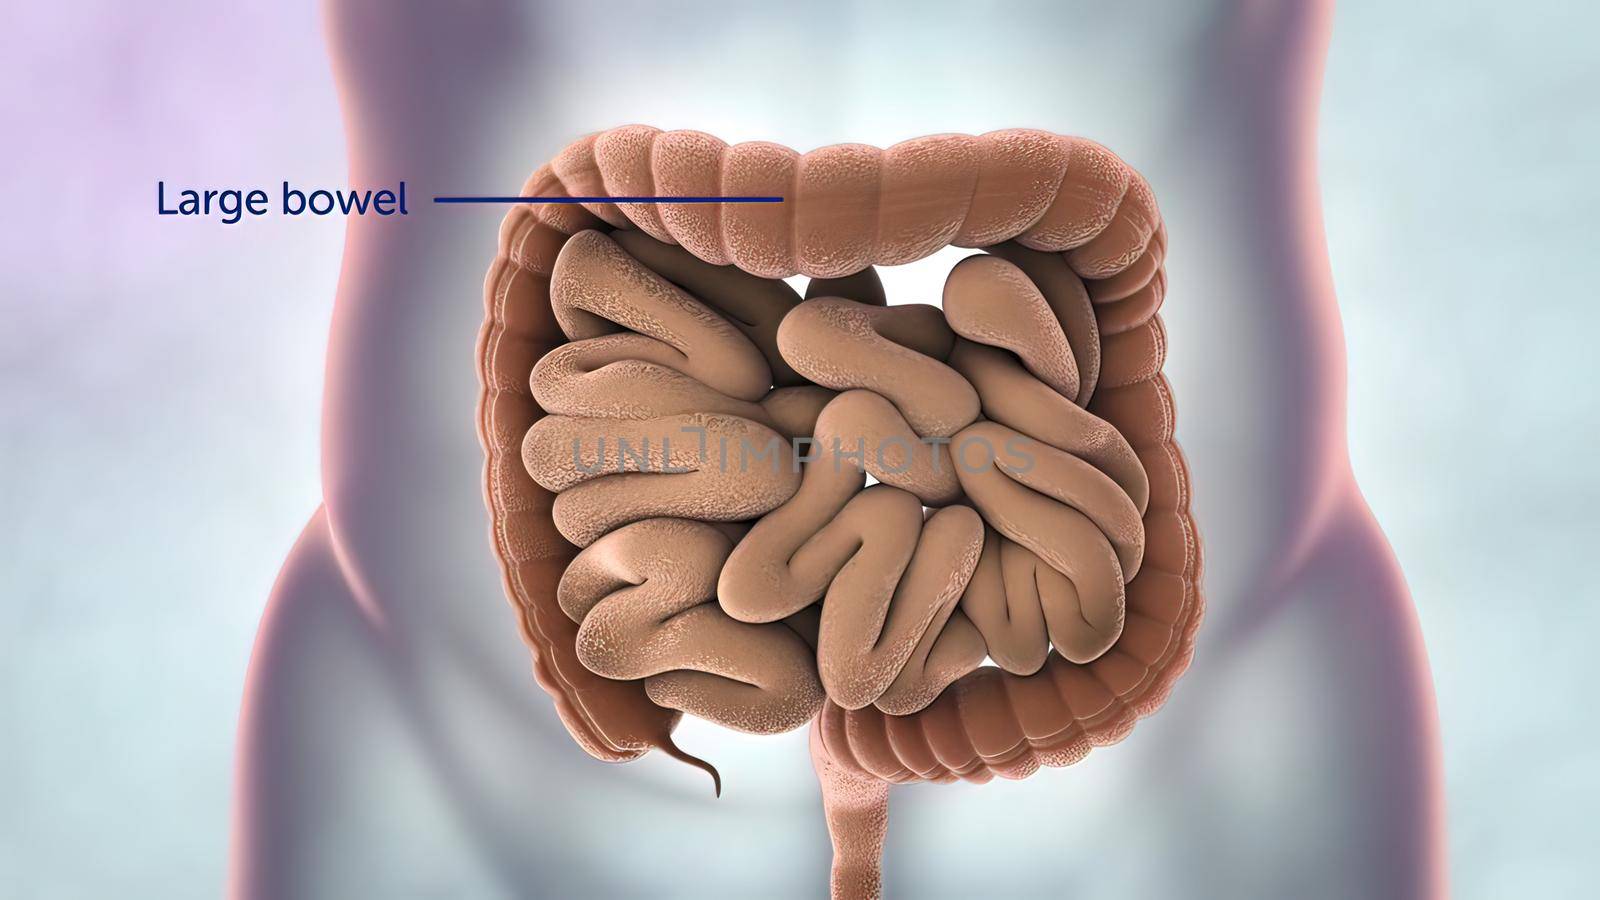 The intestine is part of the digestive system. It is made up of the small intestine and the large intestine. The colon and rectum are parts of the large intestine. 3D illustration